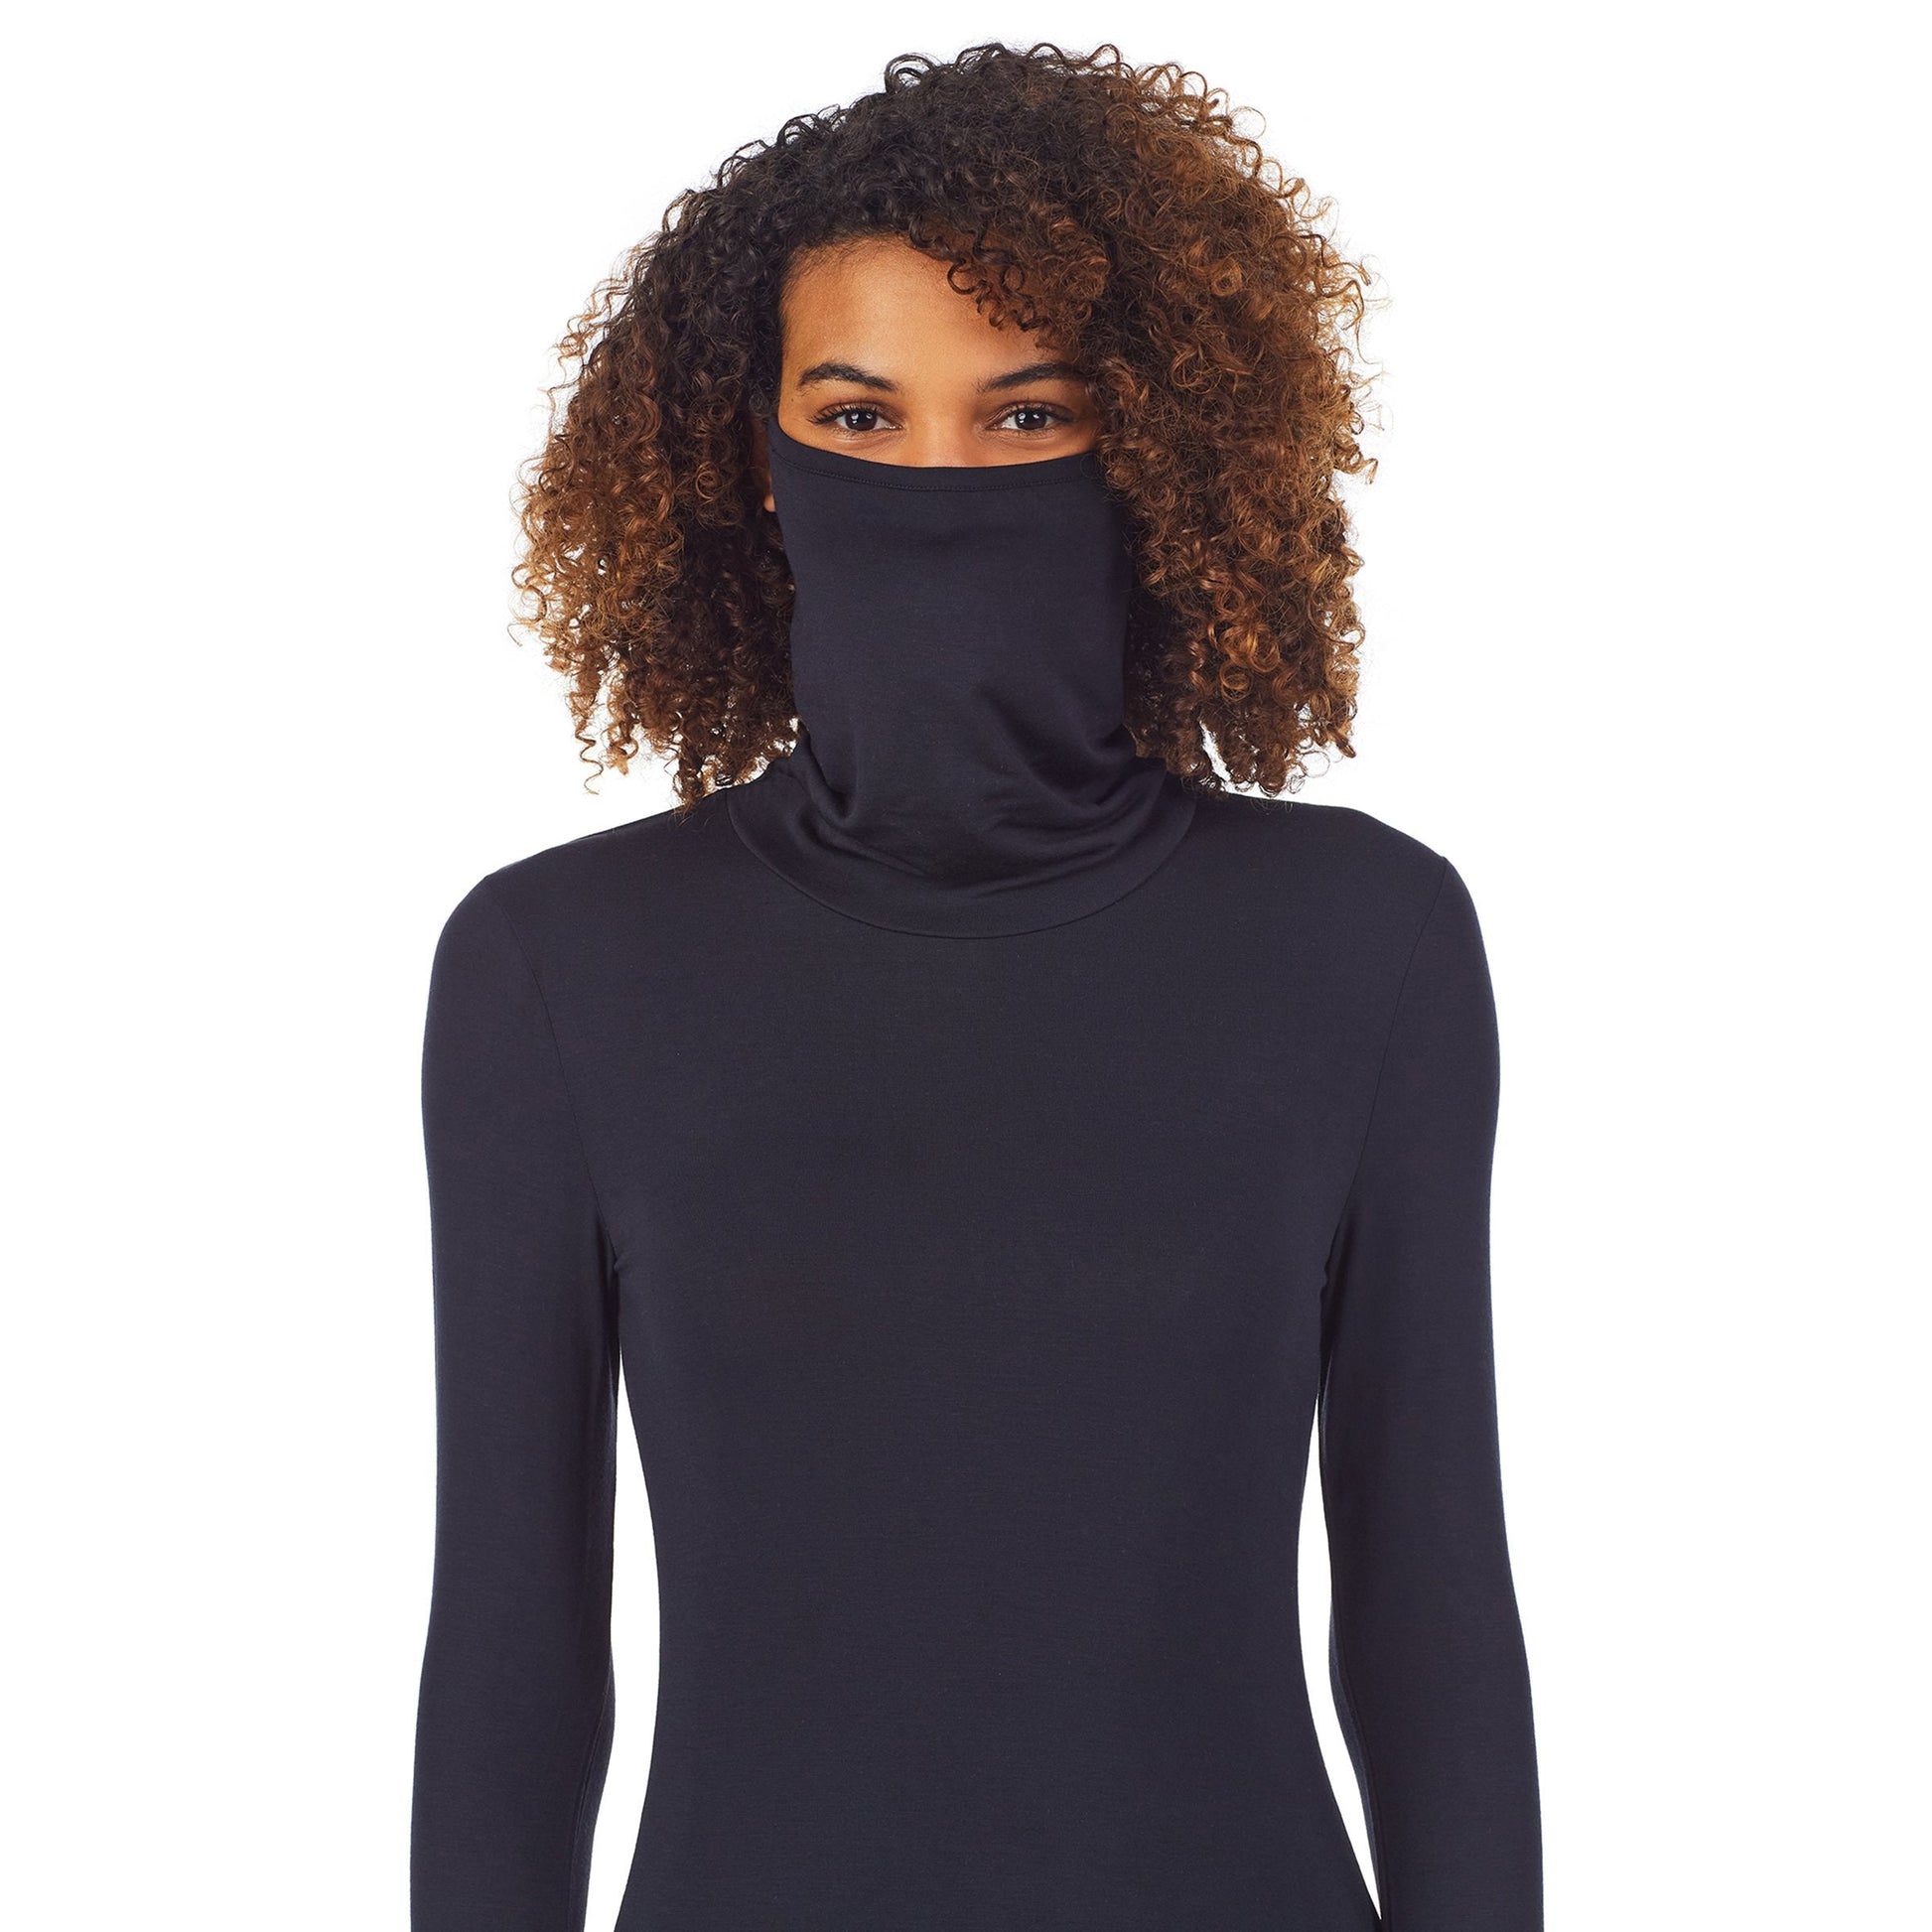 Black;Model is wearing size S. She is 5'9", Bust 34", Waist 26", Hips 36".@ A lady wearingSoftwear With Stretch Long Sleeve Convertible Cowl with Black print